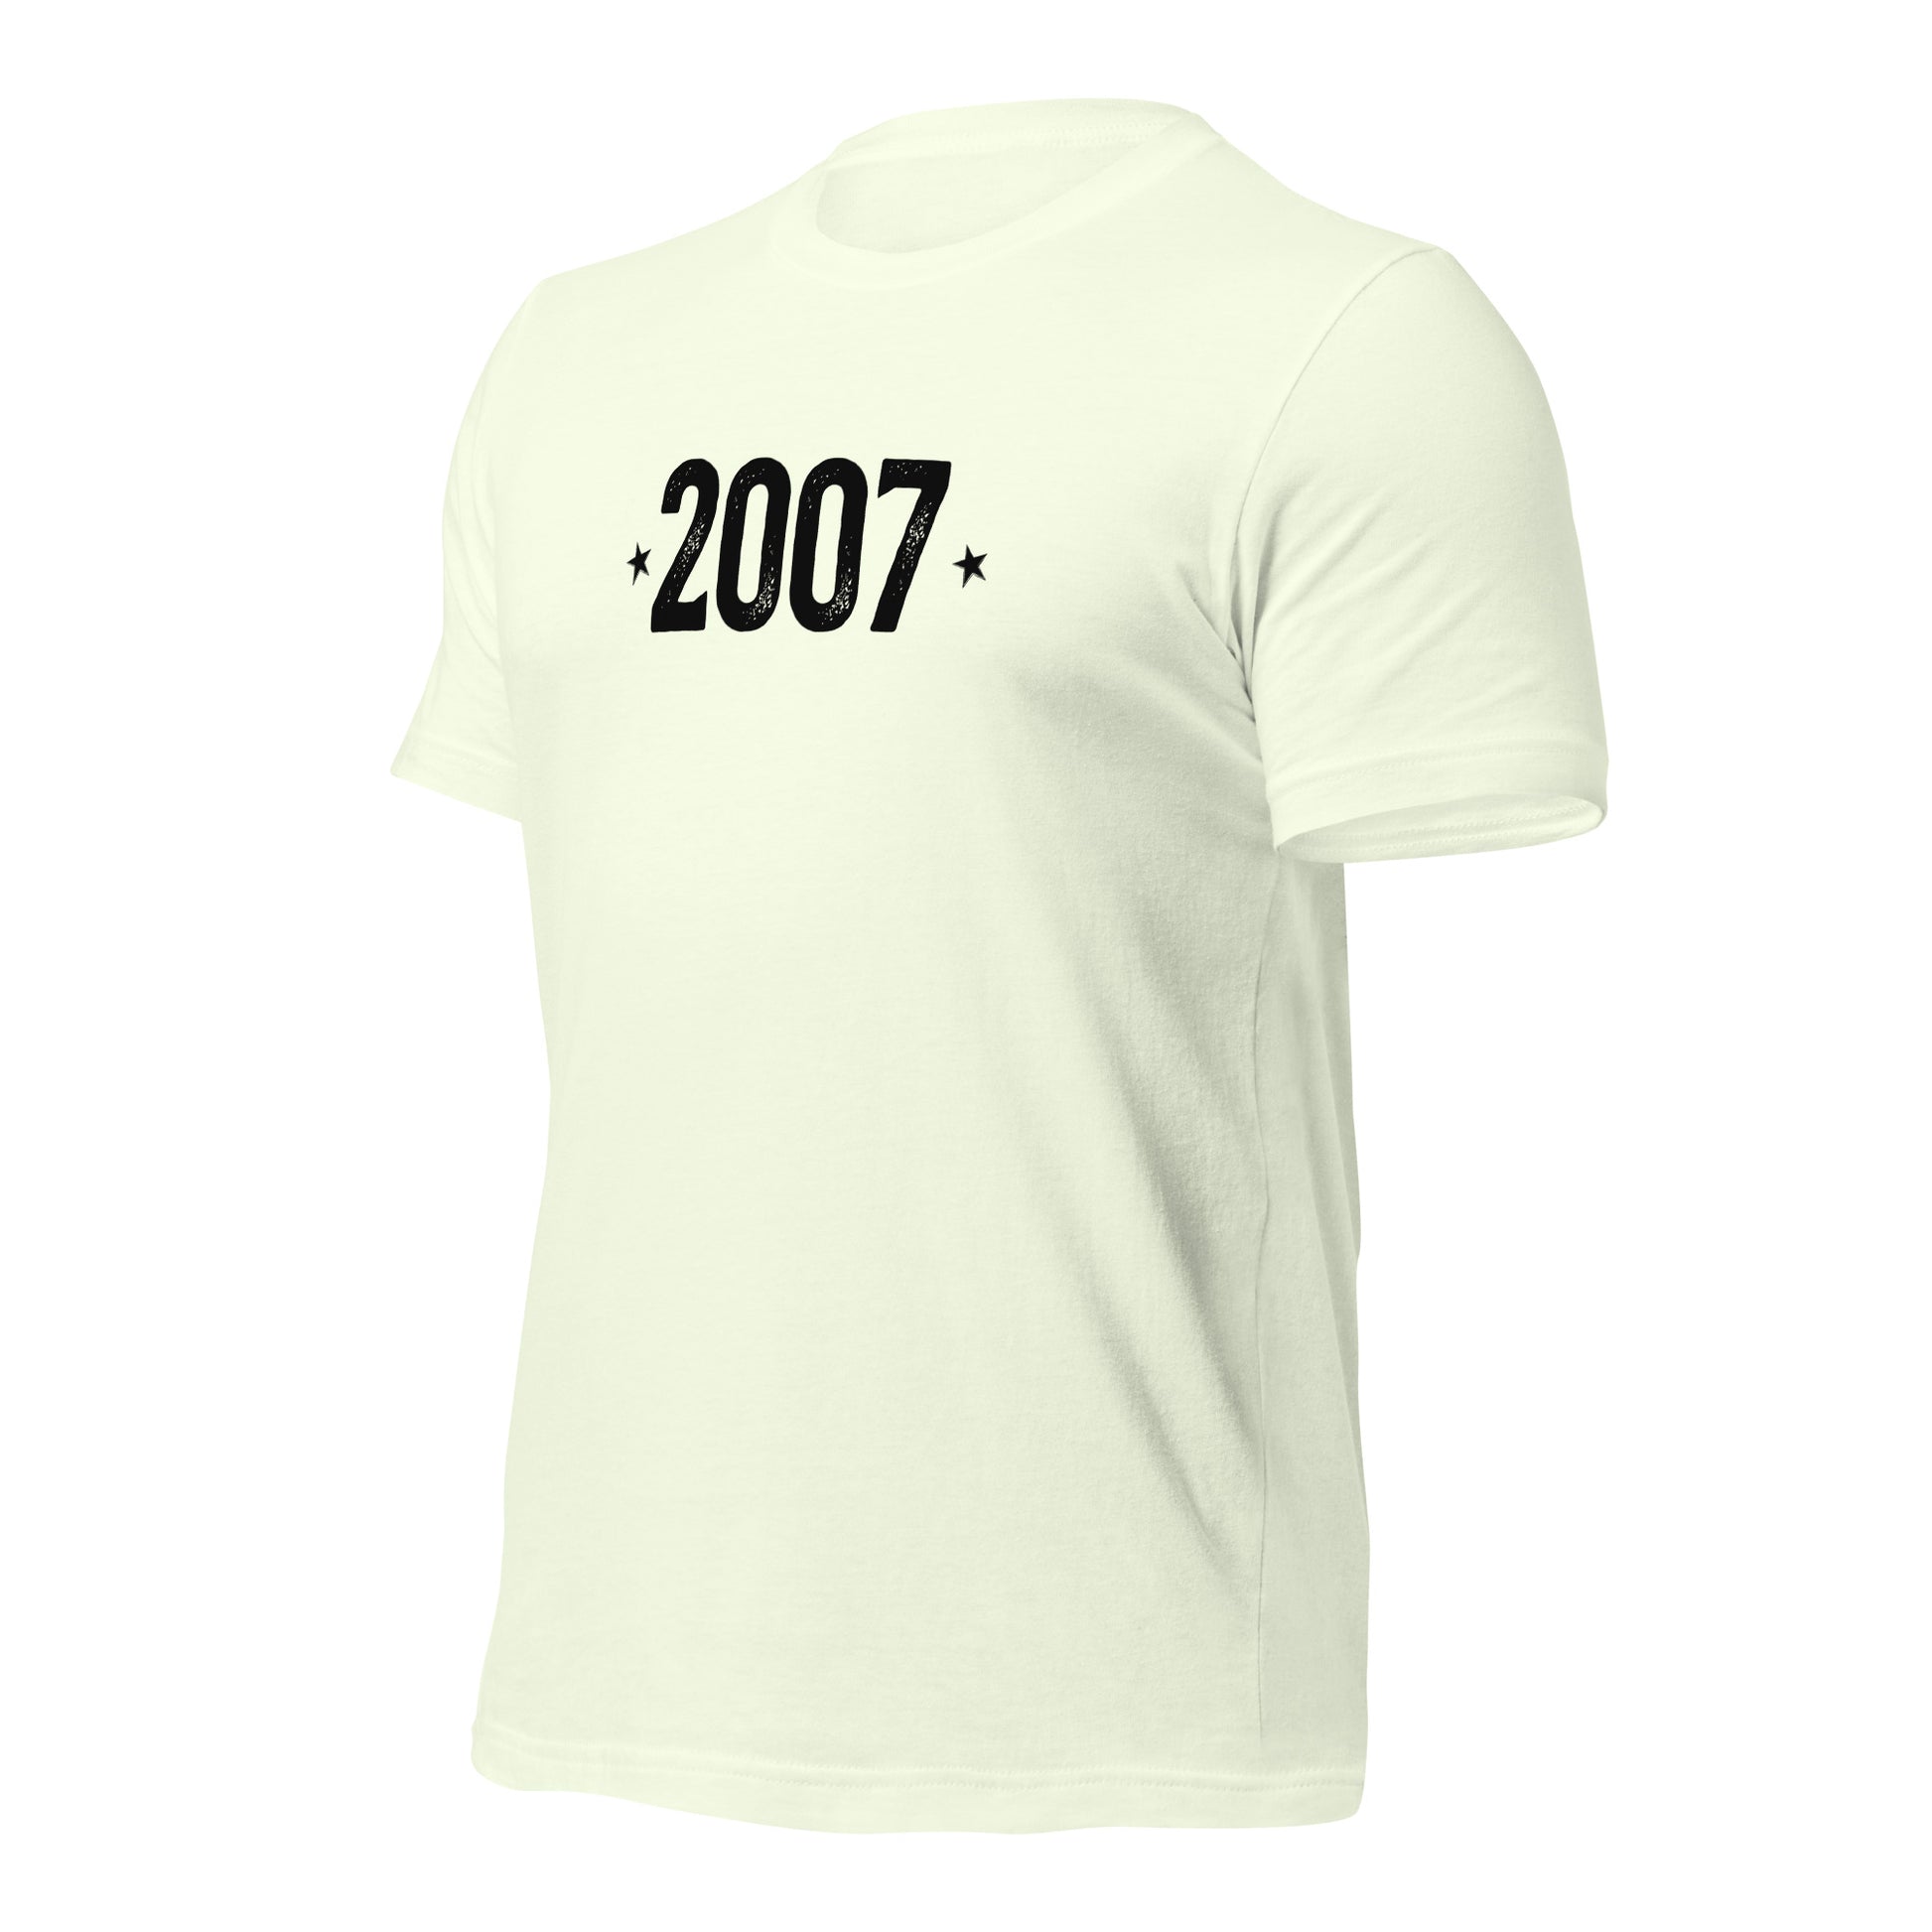 "2007" T-Shirt - Weave Got Gifts - Unique Gifts You Won’t Find Anywhere Else!